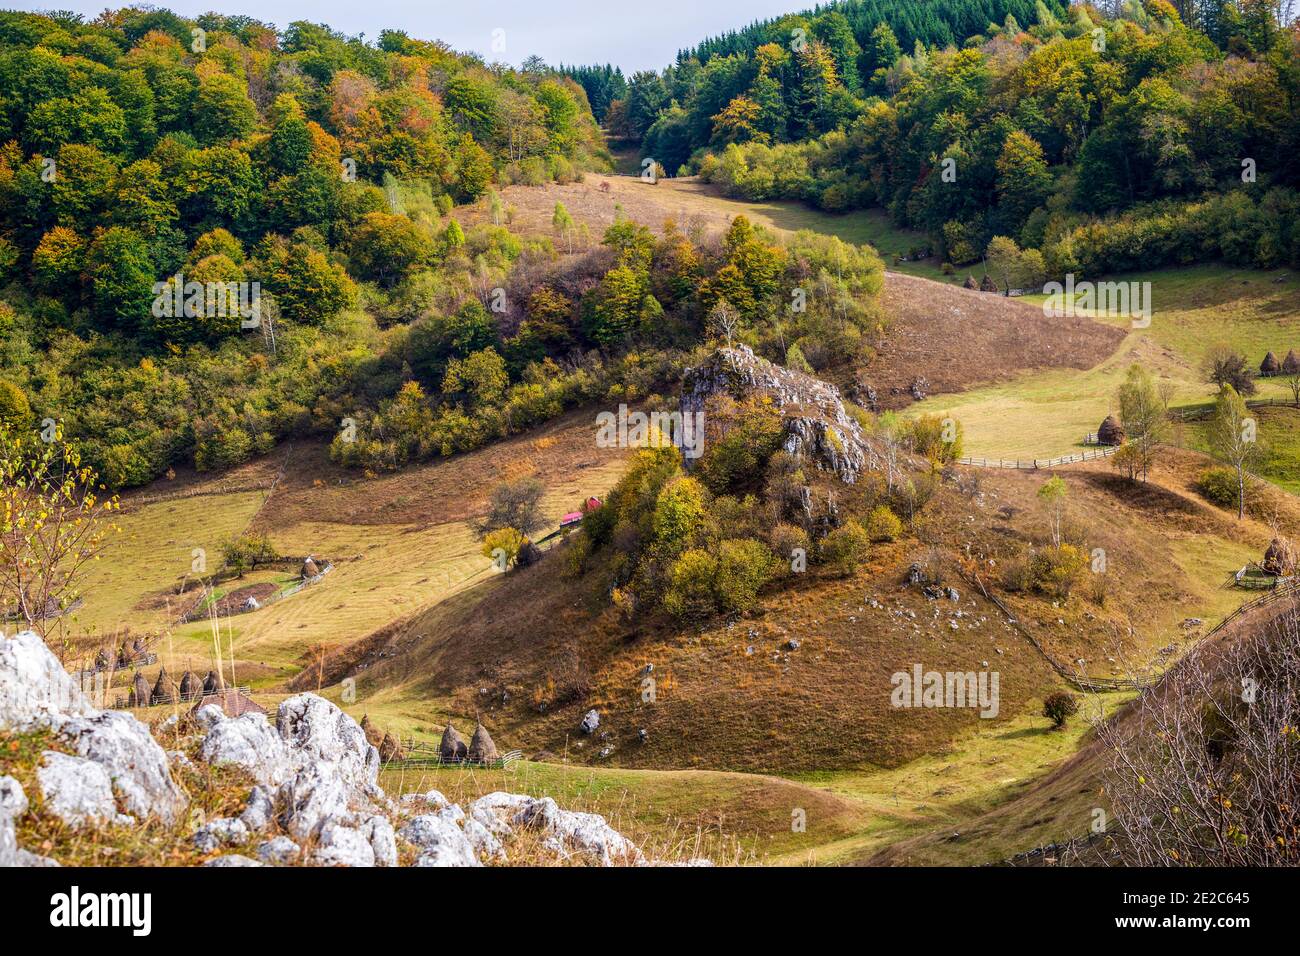 Autumn view of the wolf rock looking down on a small remote mountain village on Fundatura Ponorului. Photo taken on 5th of October 2019 in Fundatura P Stock Photo